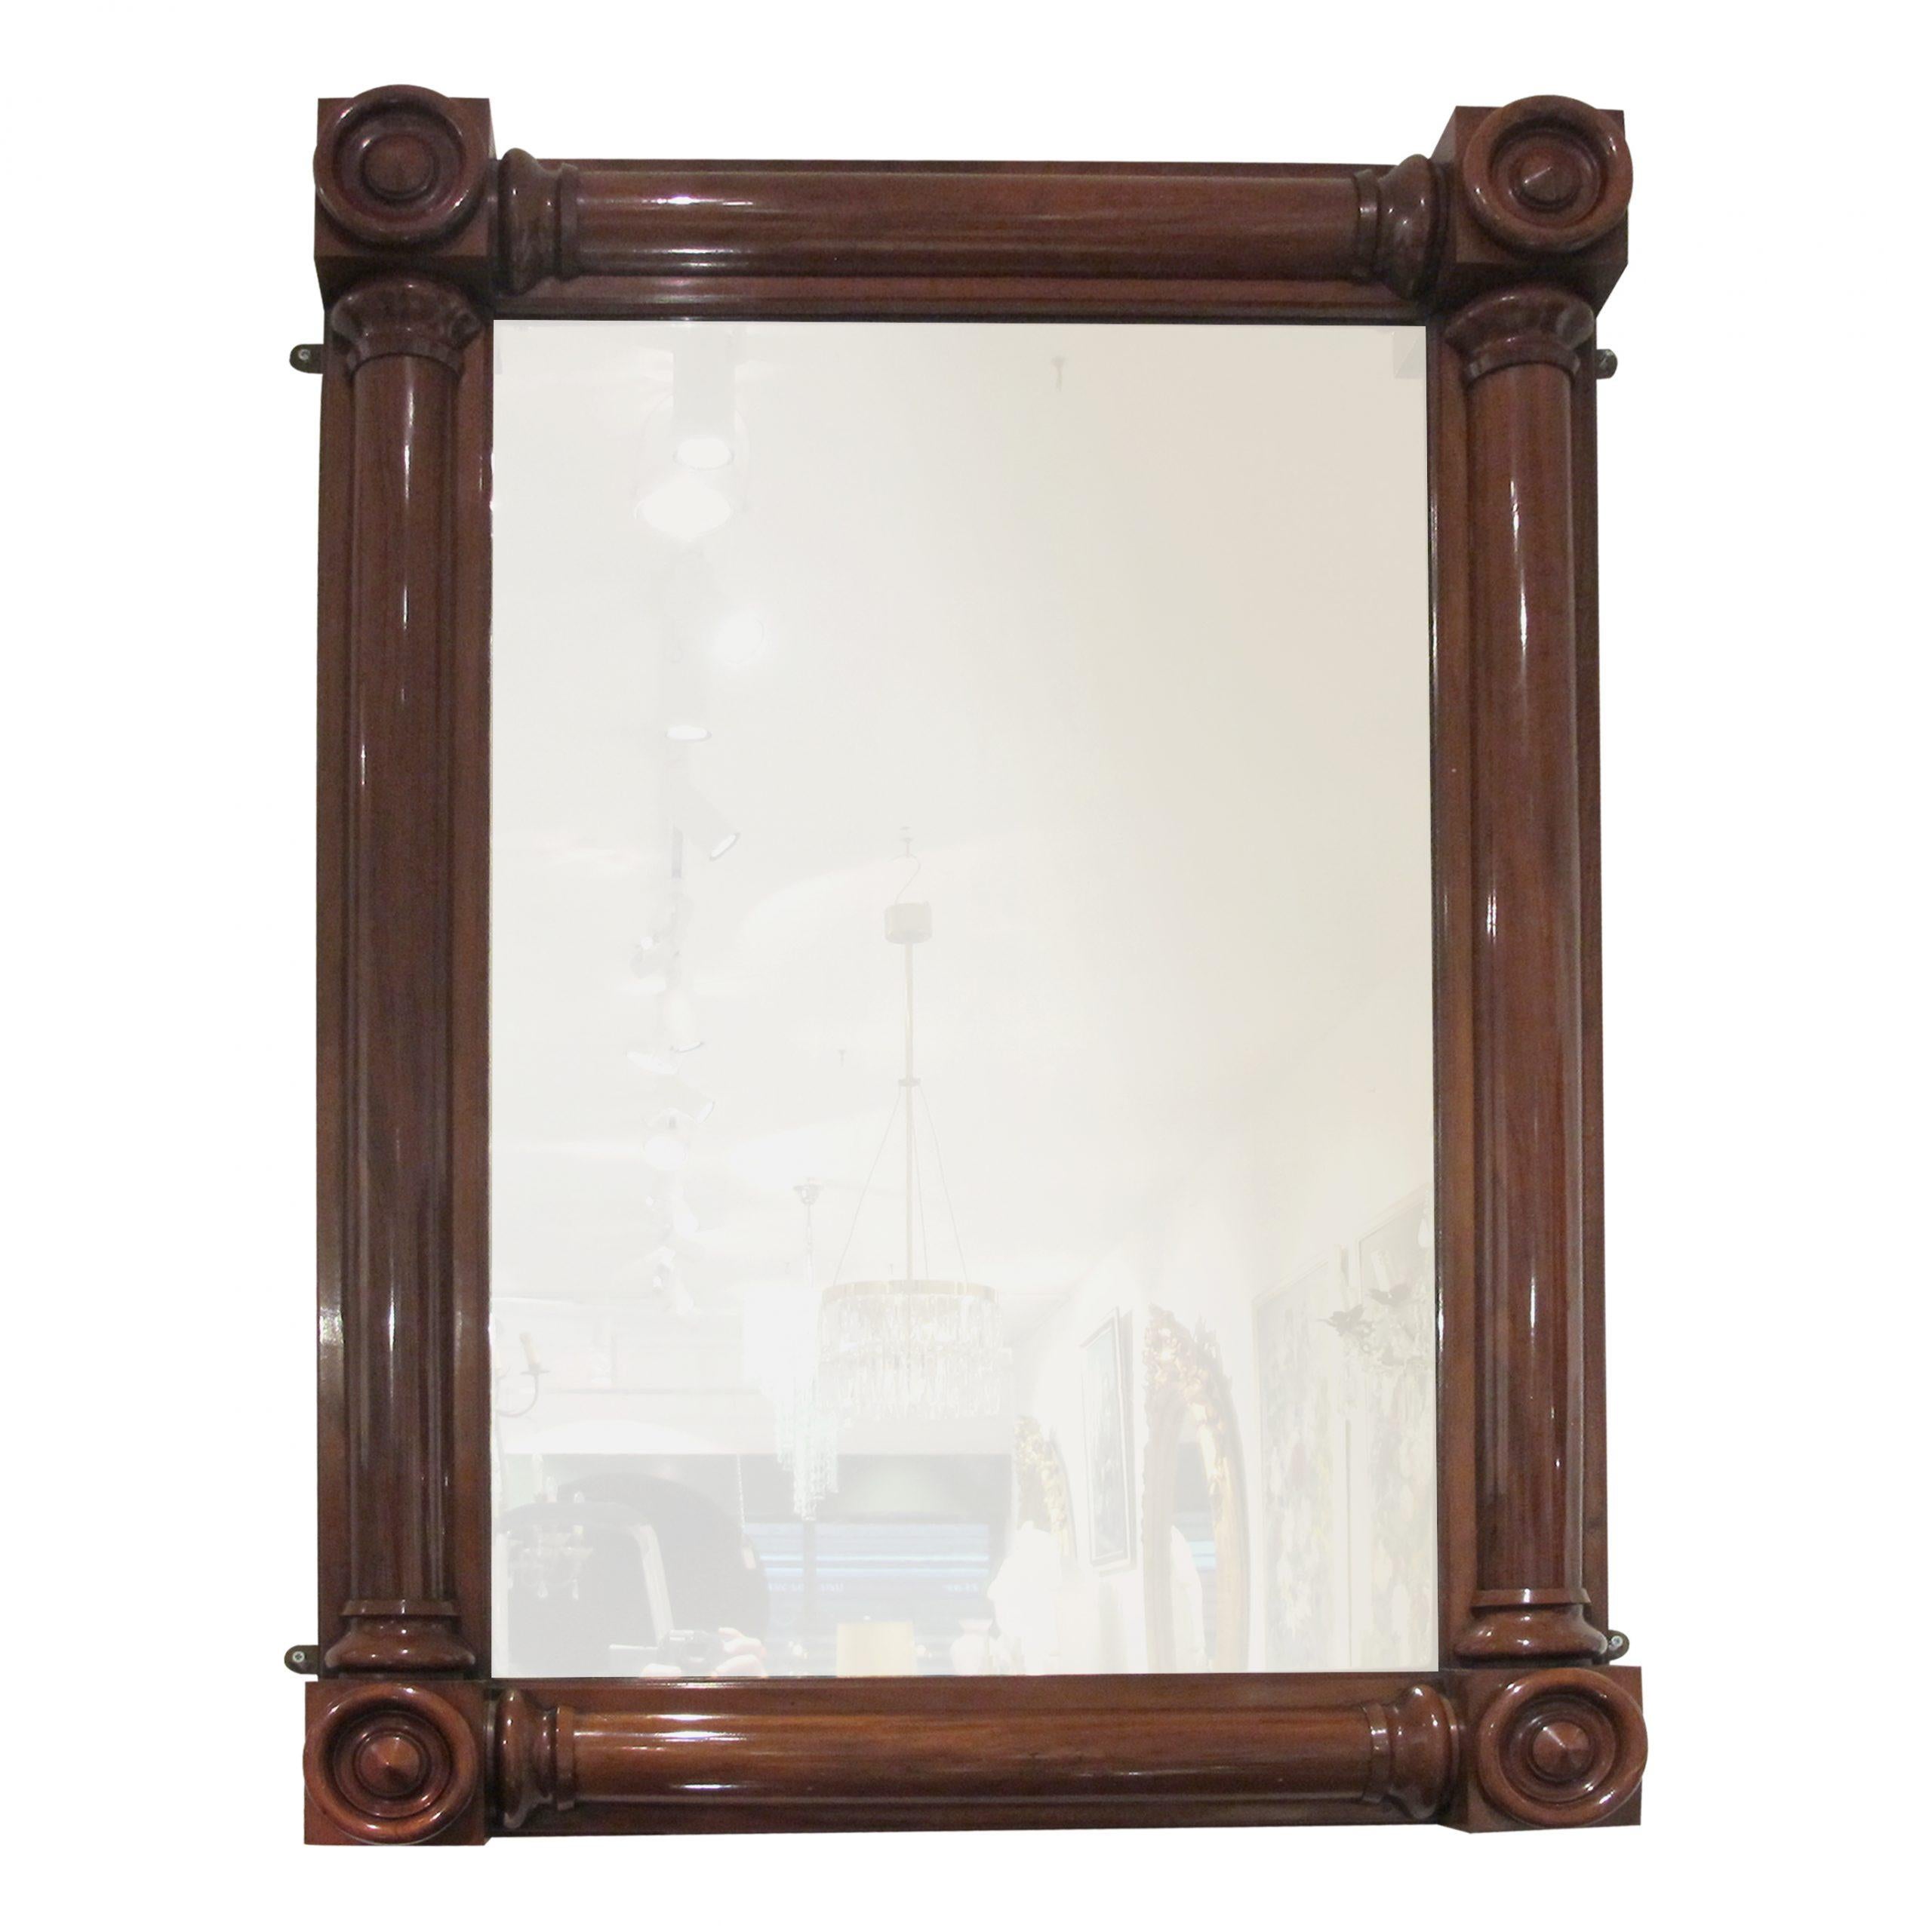 This is a majestic structural mahogany William the IV mirror, 1830s. The symmetry of the mirror allows it to stand alone, over a mantel or in a landscape position. The original glass shows barely noticeable signs of foxing adding character to the